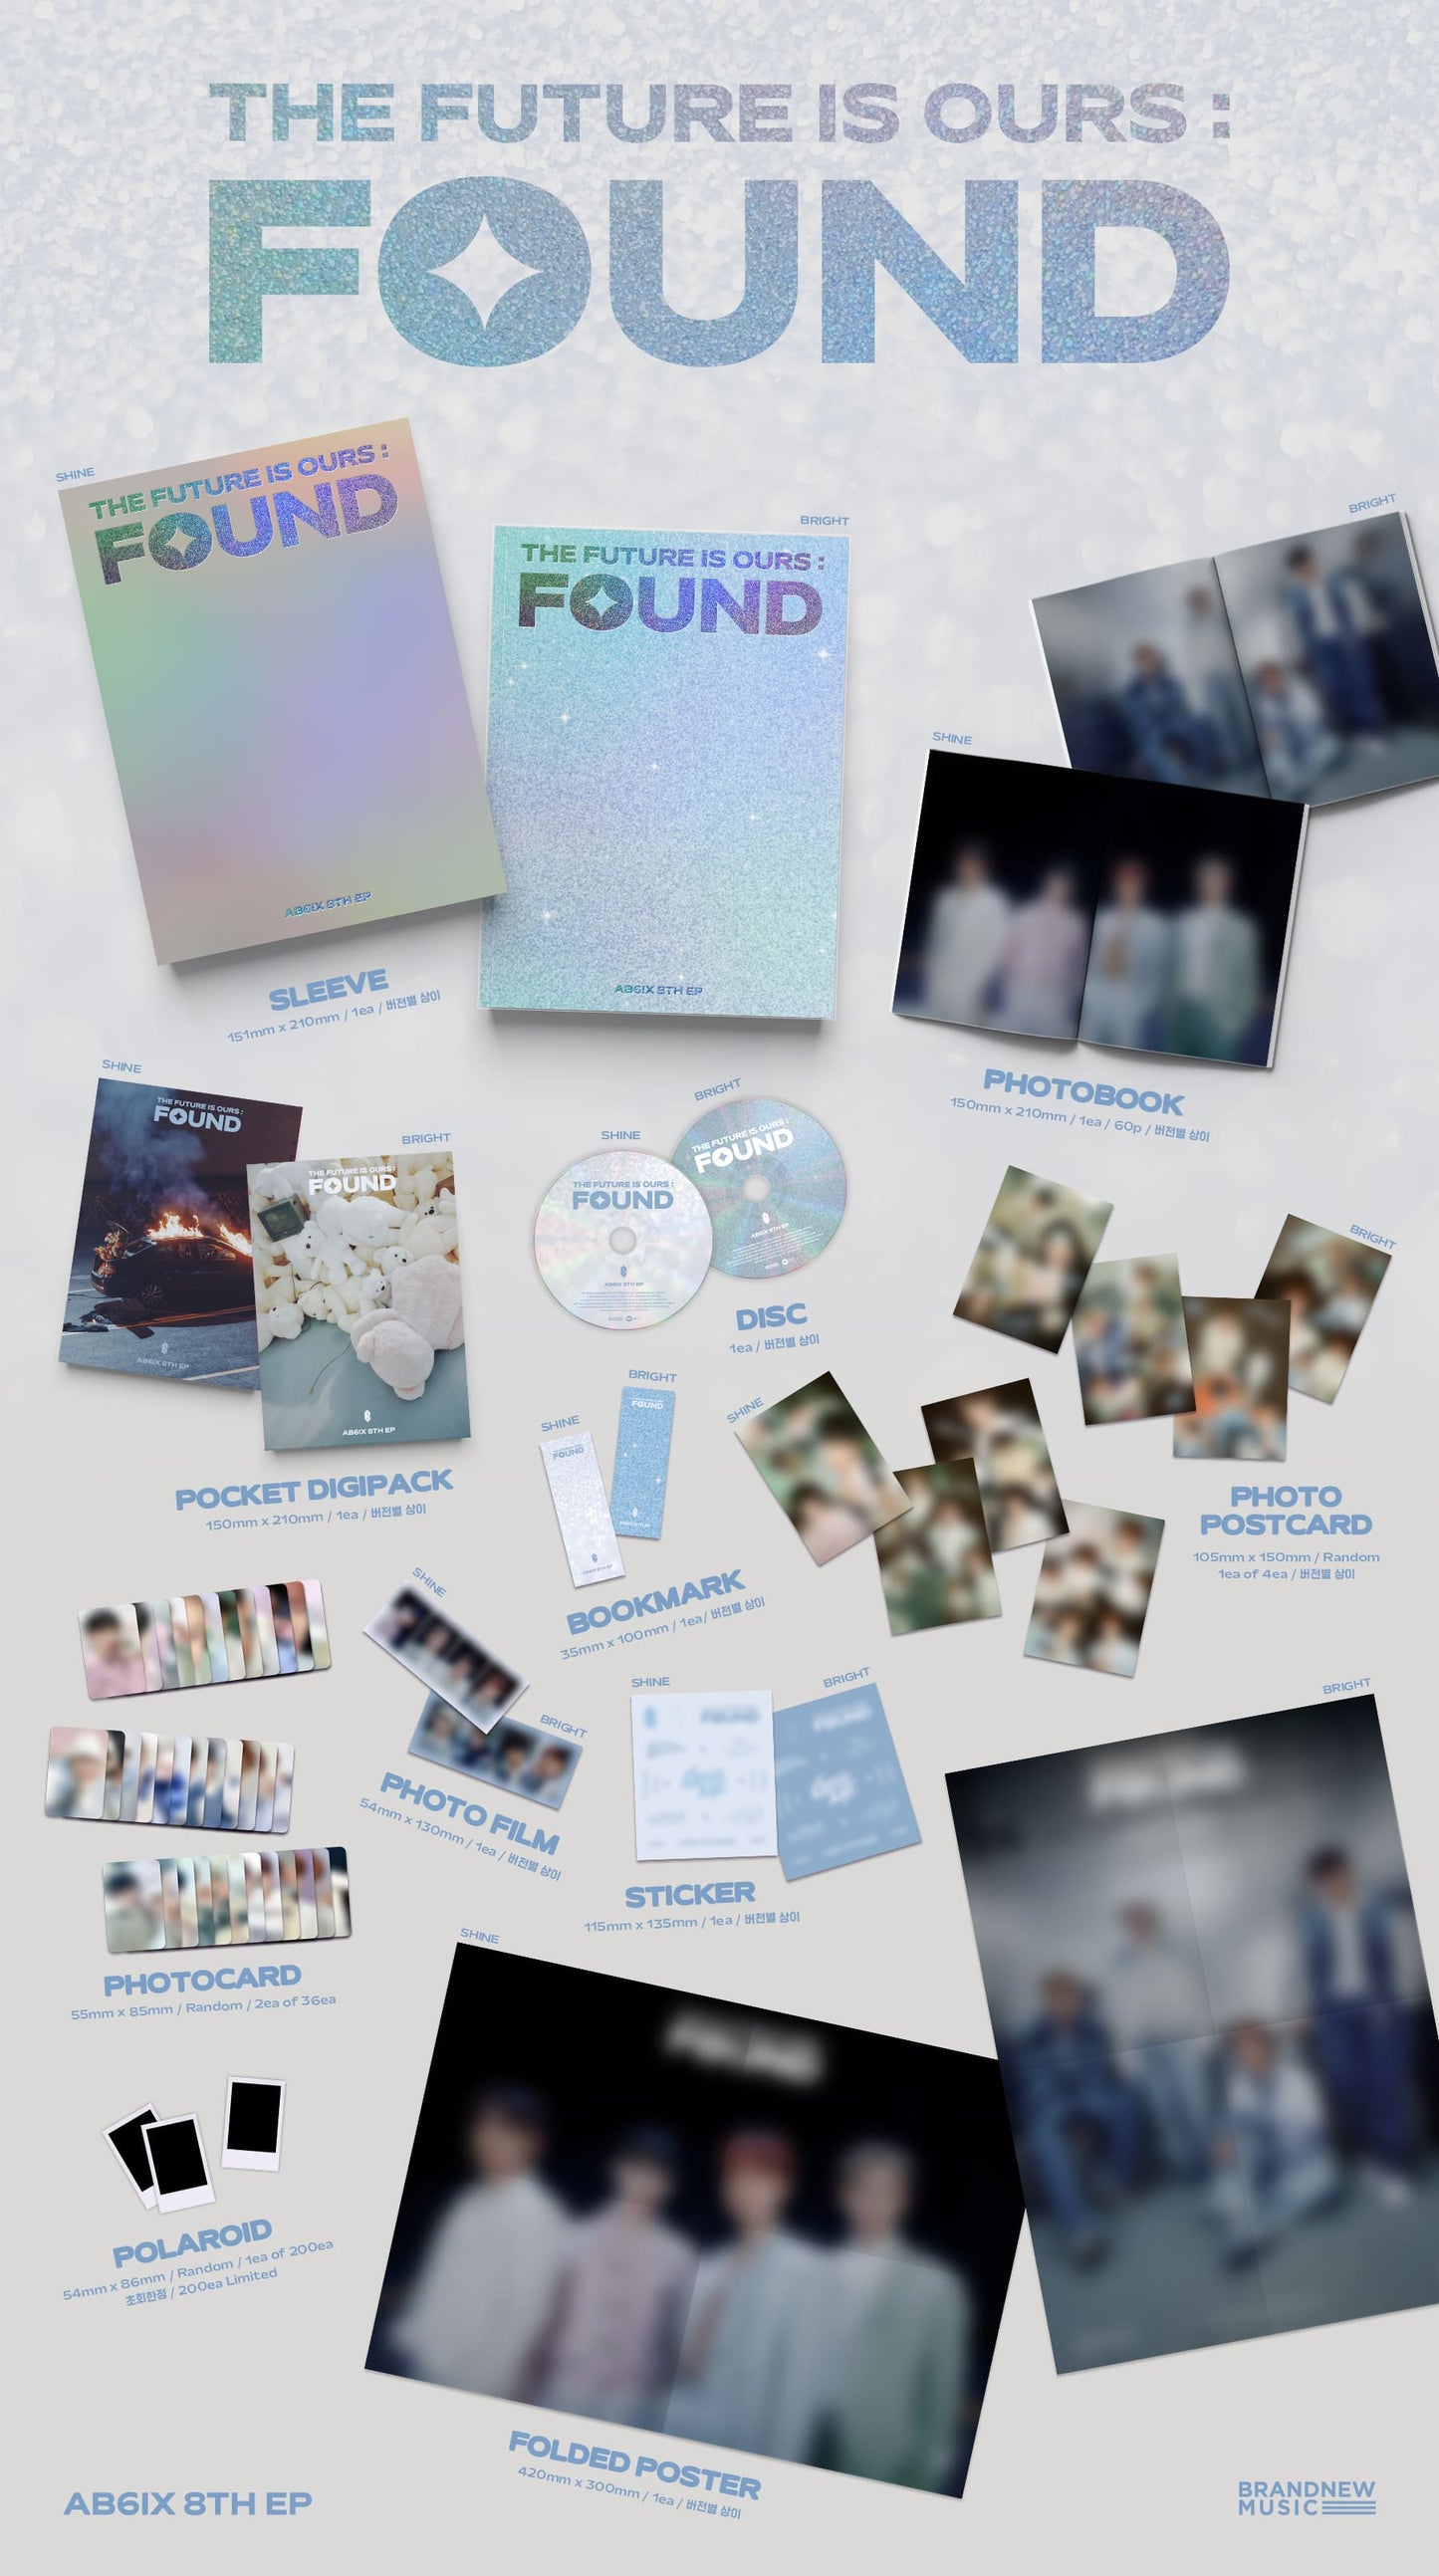 [PRE-ORDER] AB6IX - 8th EP Album [THE FUTURE IS OURS : FOUND] (Standard Ver.) + Makestar Photocard